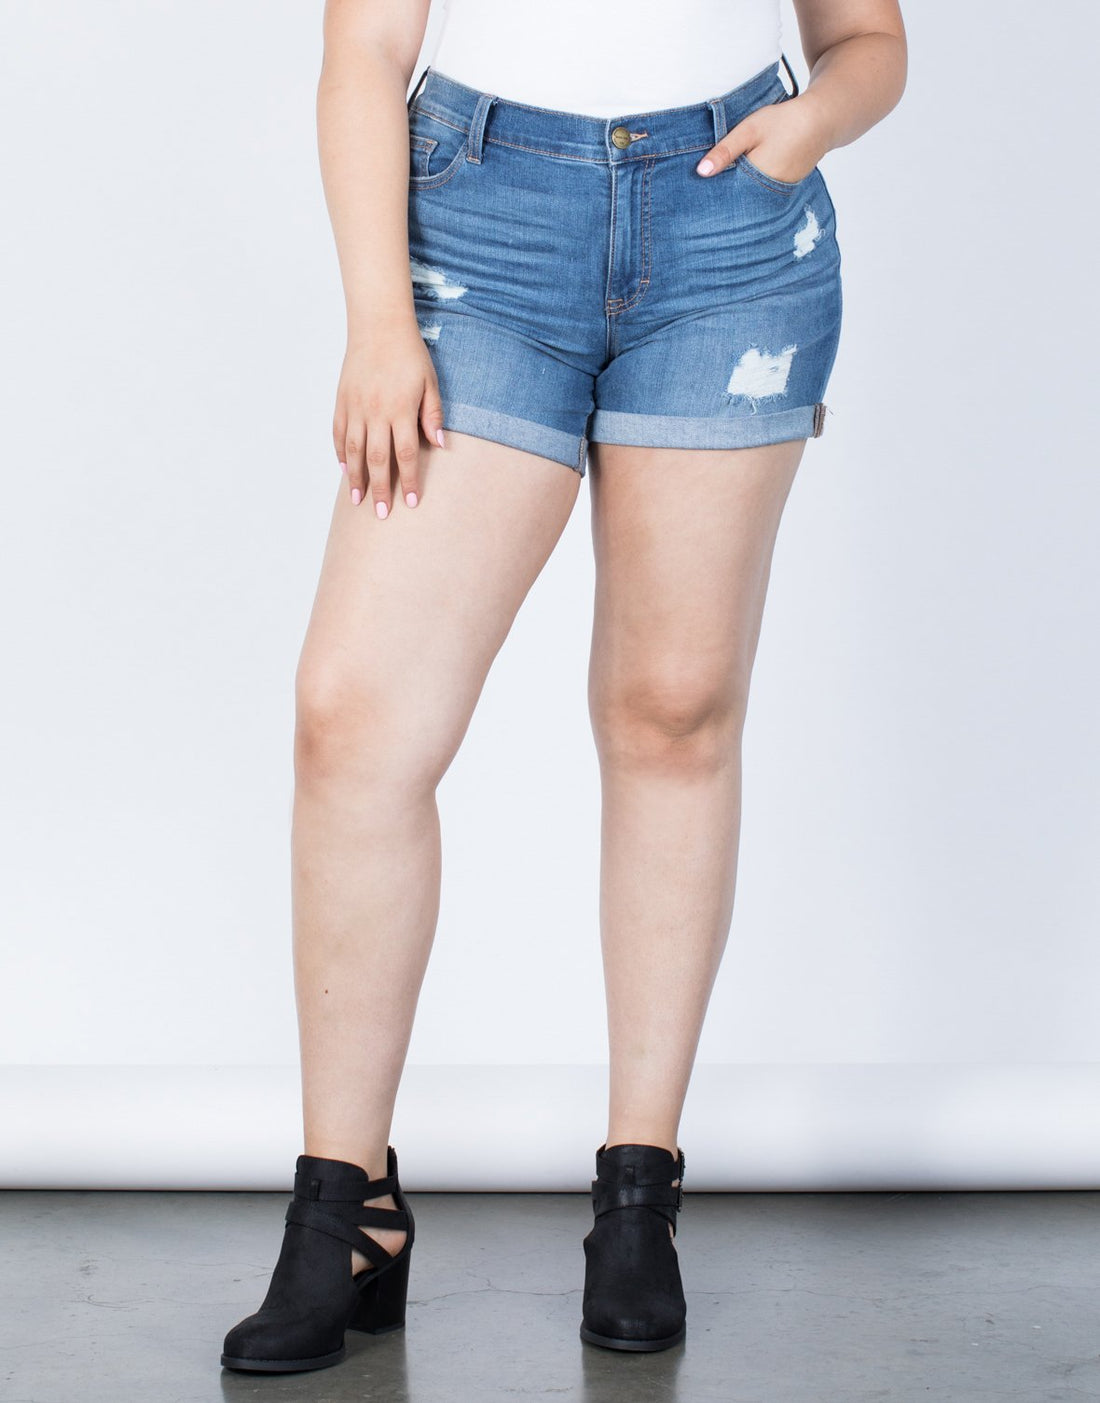 Curve Love Your Cuffed Shorts Plus Size Bottoms -2020AVE